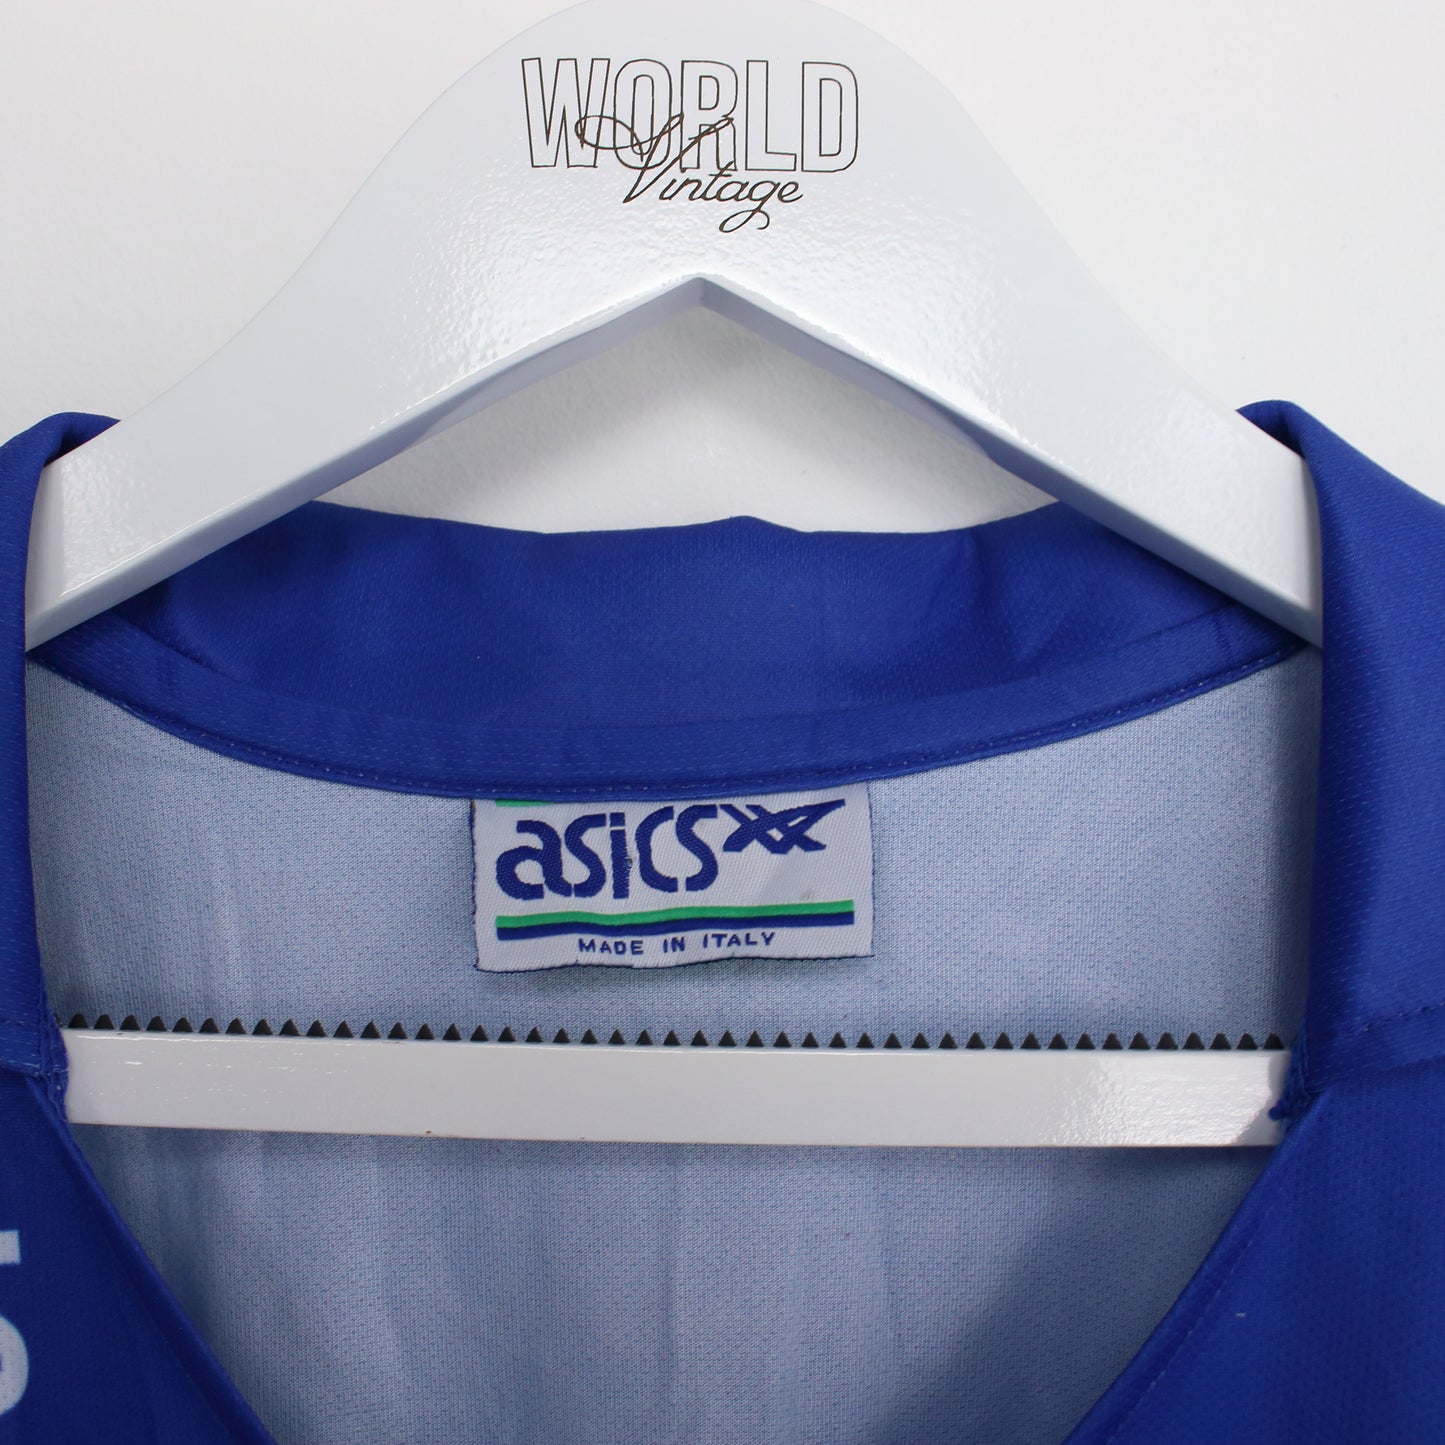 Vintage Asics AC Sampadoria 1990/91 home football shirt in blue, white and red. Best fits XXL